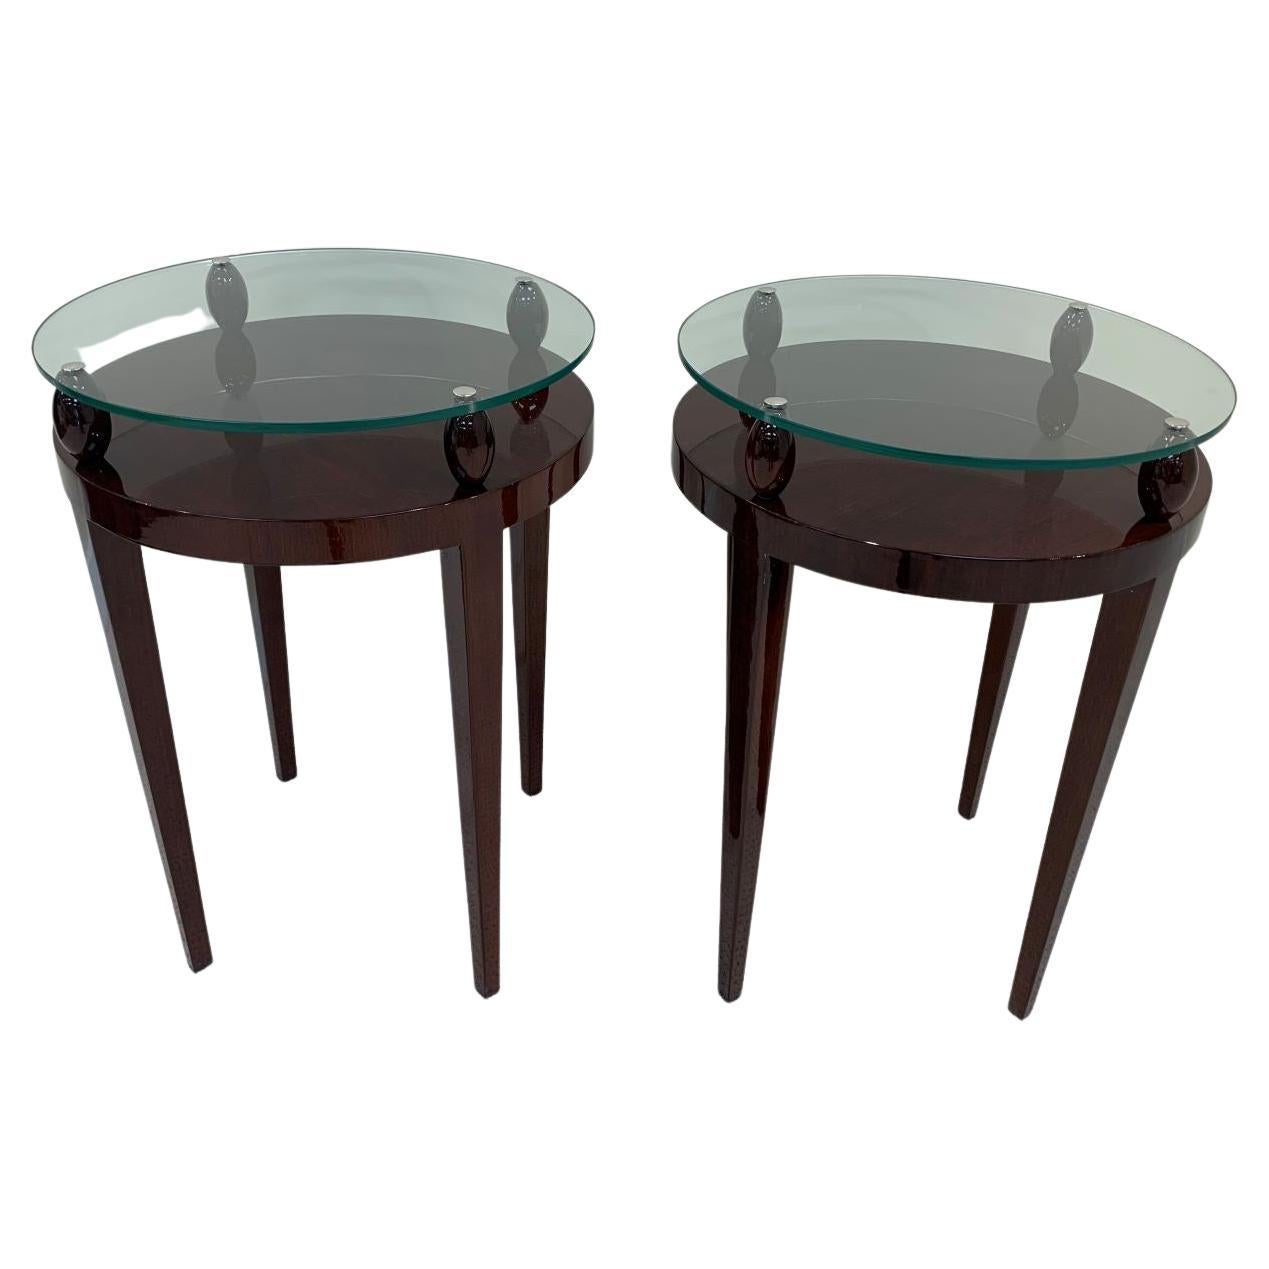 Stunning pair of Art Deco glass-top end tables. Professionally and beautifully restored solid walnut tables with 3/8” thick glass that floats on oval shaped walnut finials. Very rare and unusual tables from the period. Measures: Height 27.75 inches 